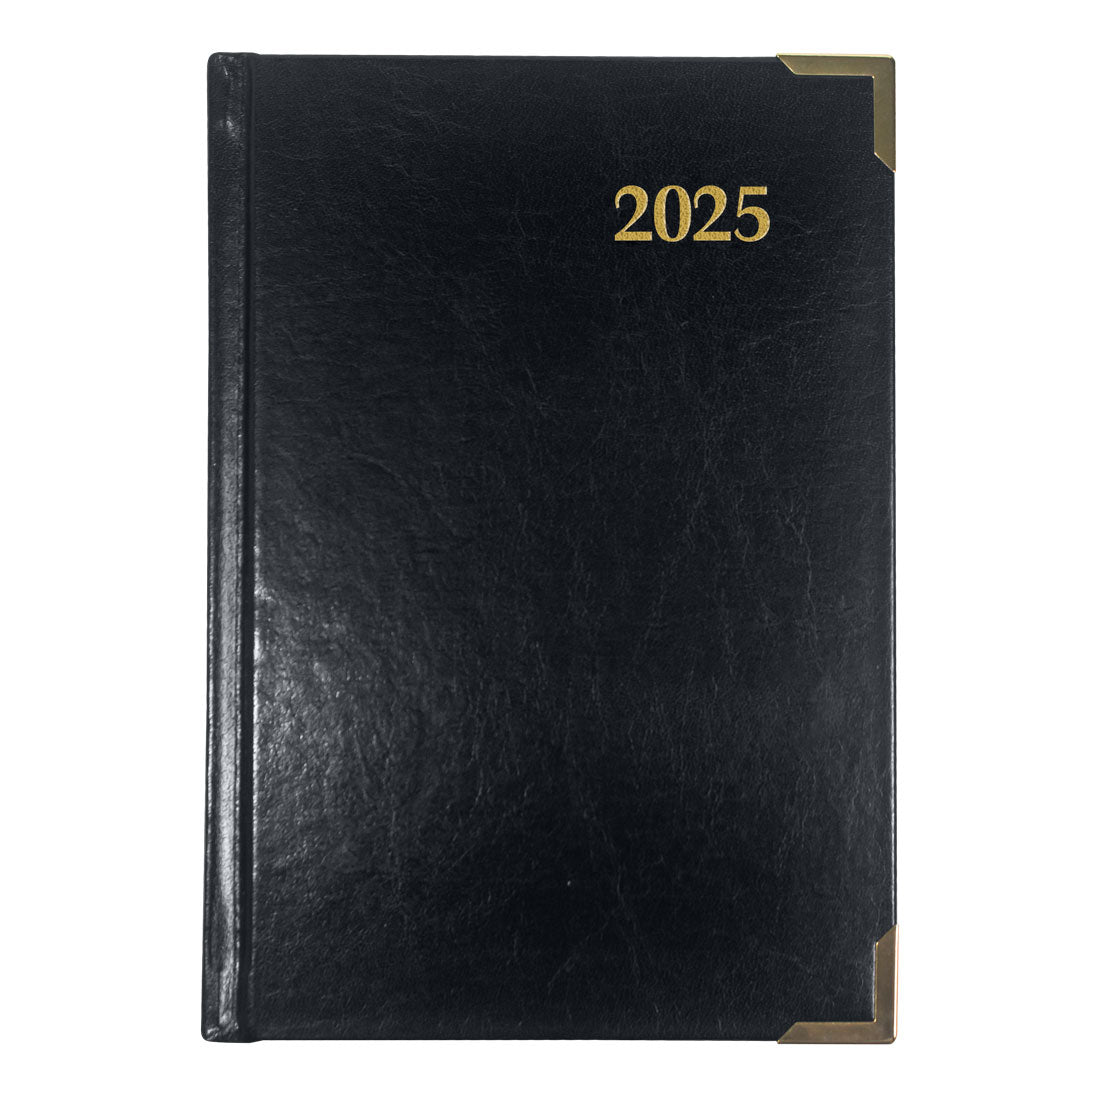 Executive Daily Planner 2025, Assorted colors, CBE504.ASX